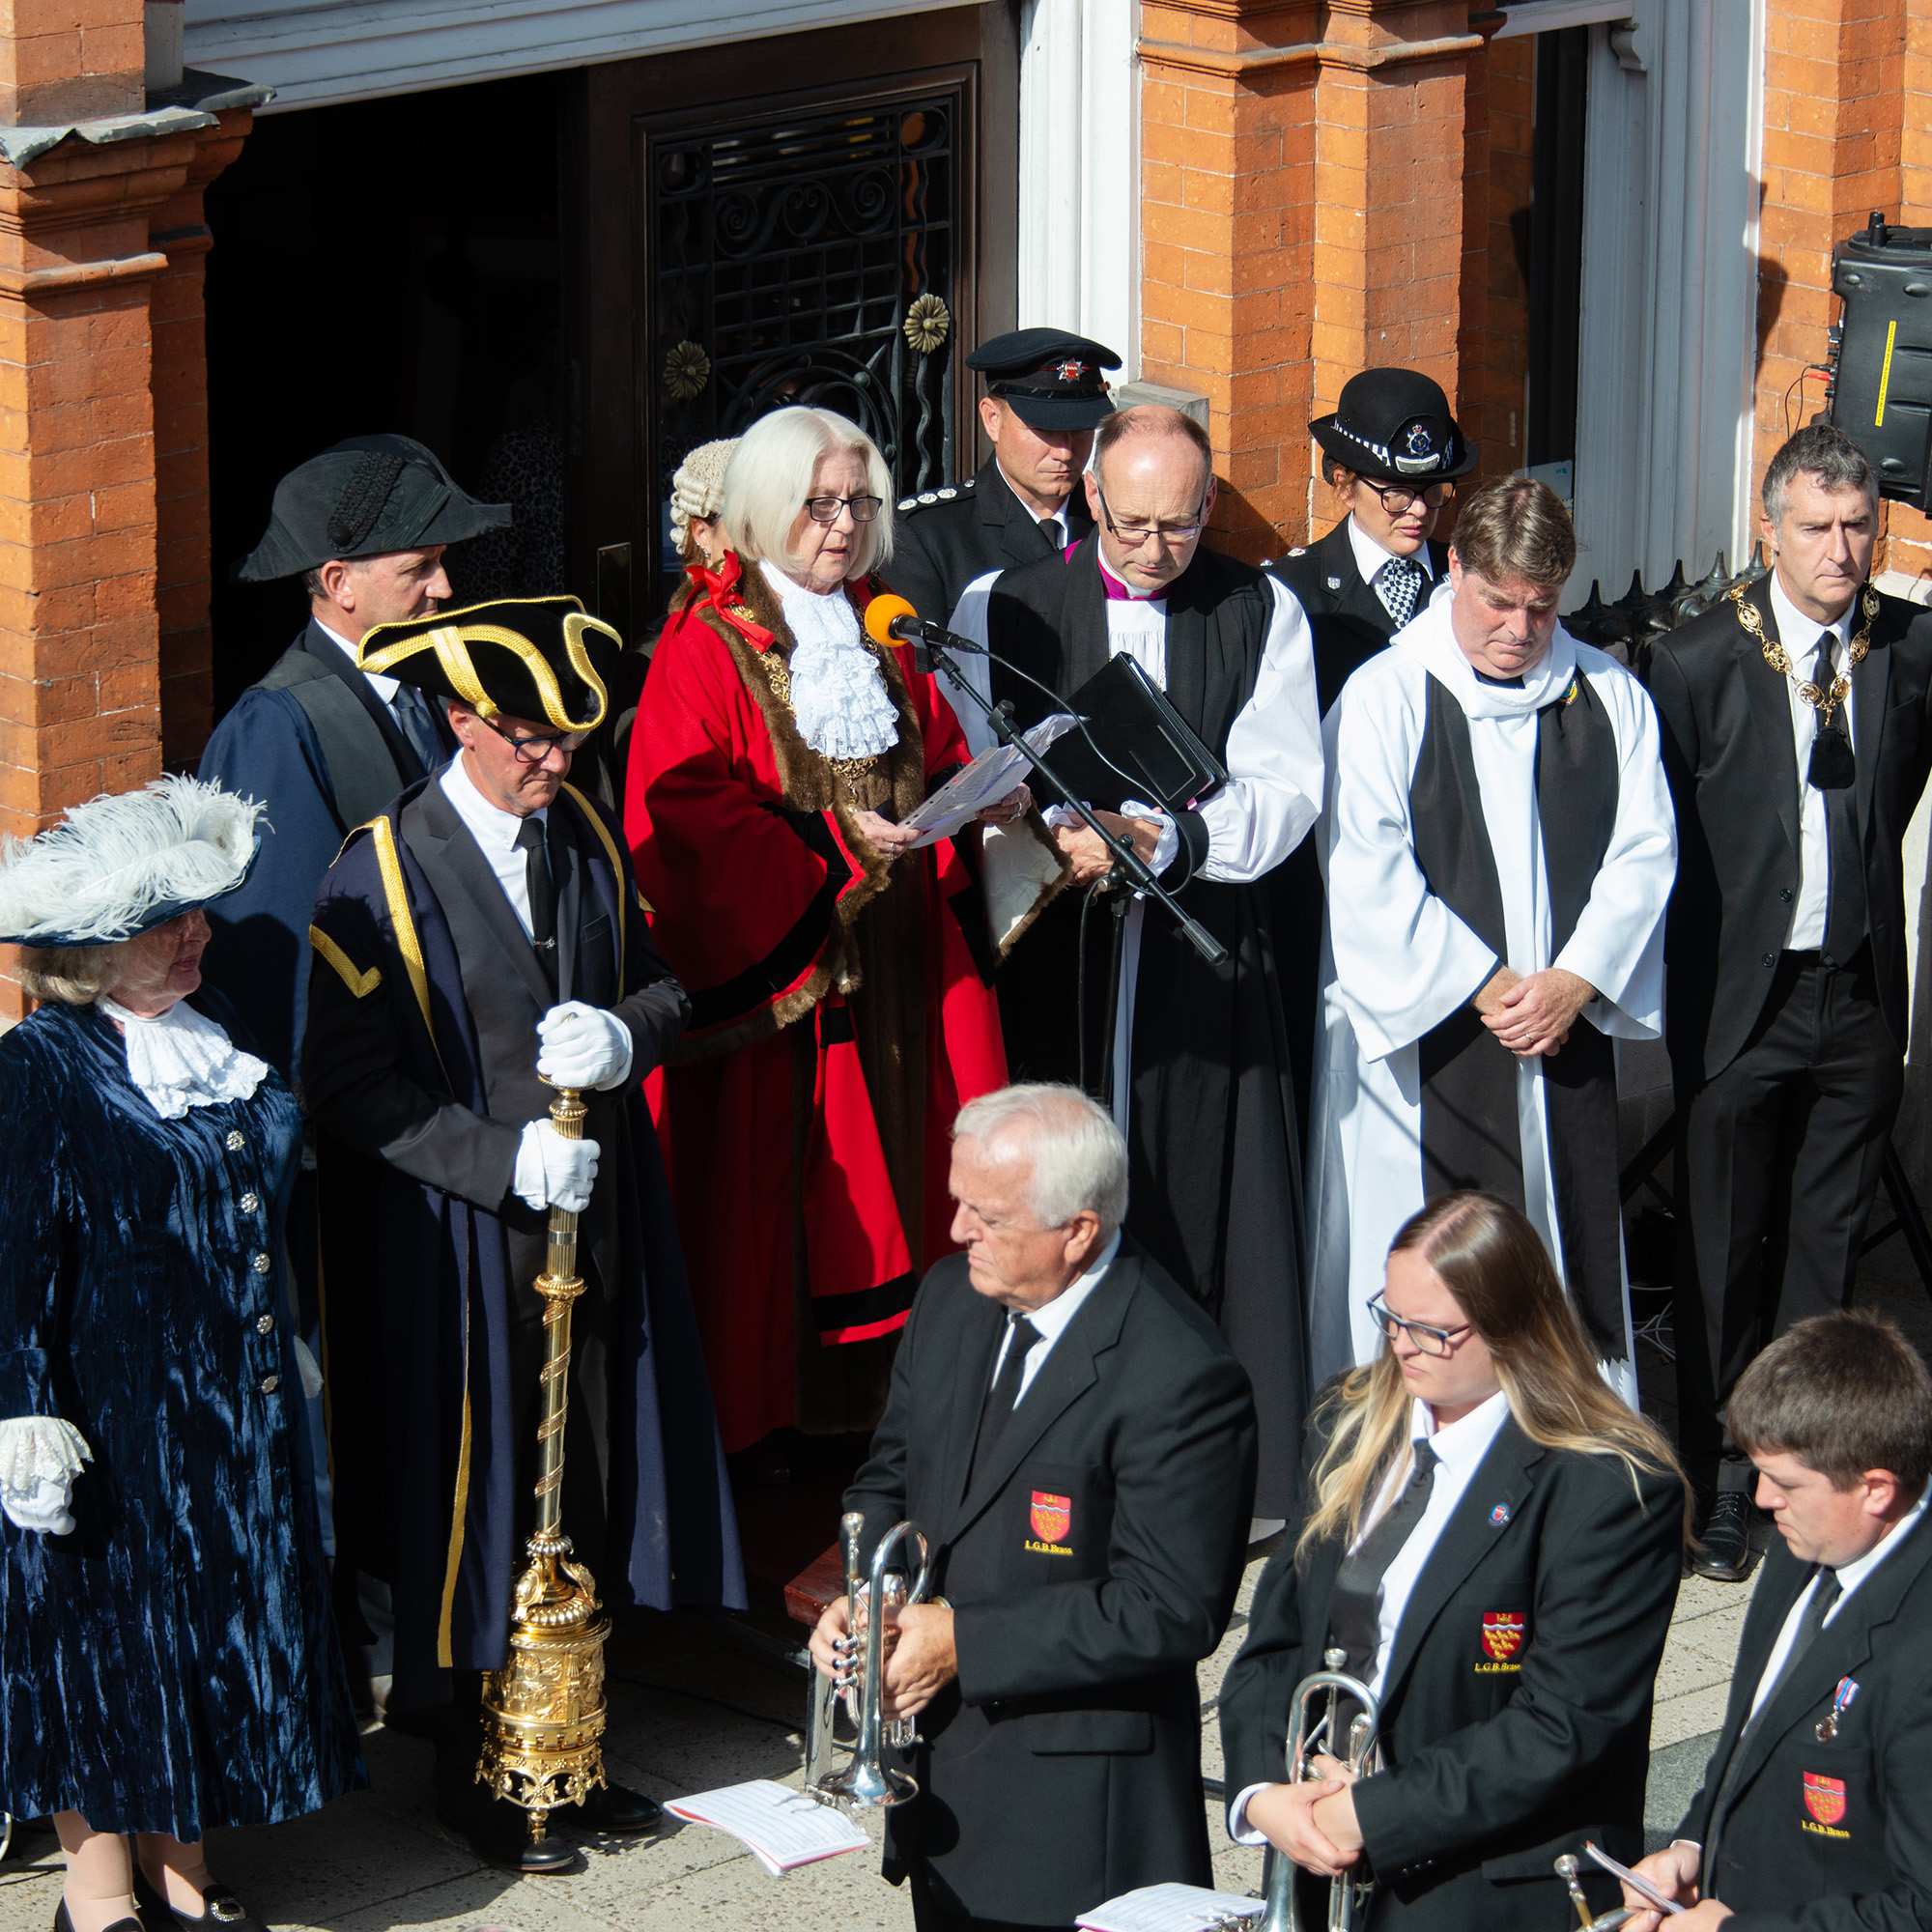 Proclamation of the new King at Lewes Town Hall 2022